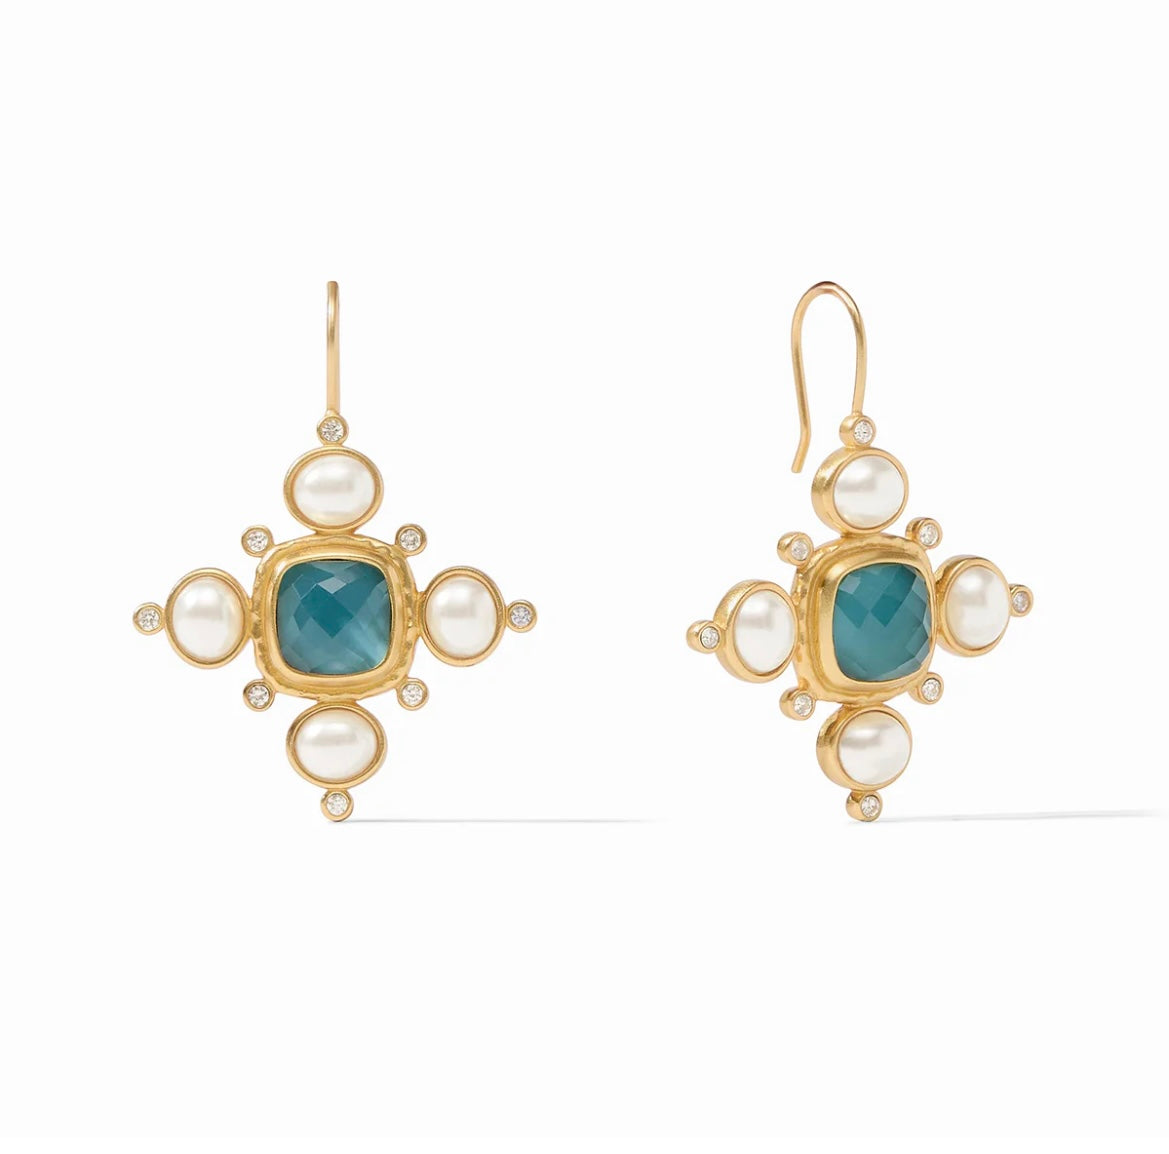 Tudor Earring - Iridescent Peacock Blue by Julie Vos. A cushion cut gemstone is set at the center of this show-stopping earring, surrounded by CZs and pearls. .8 inches. Shop at The Painted Cottage in Edgewater, MD.